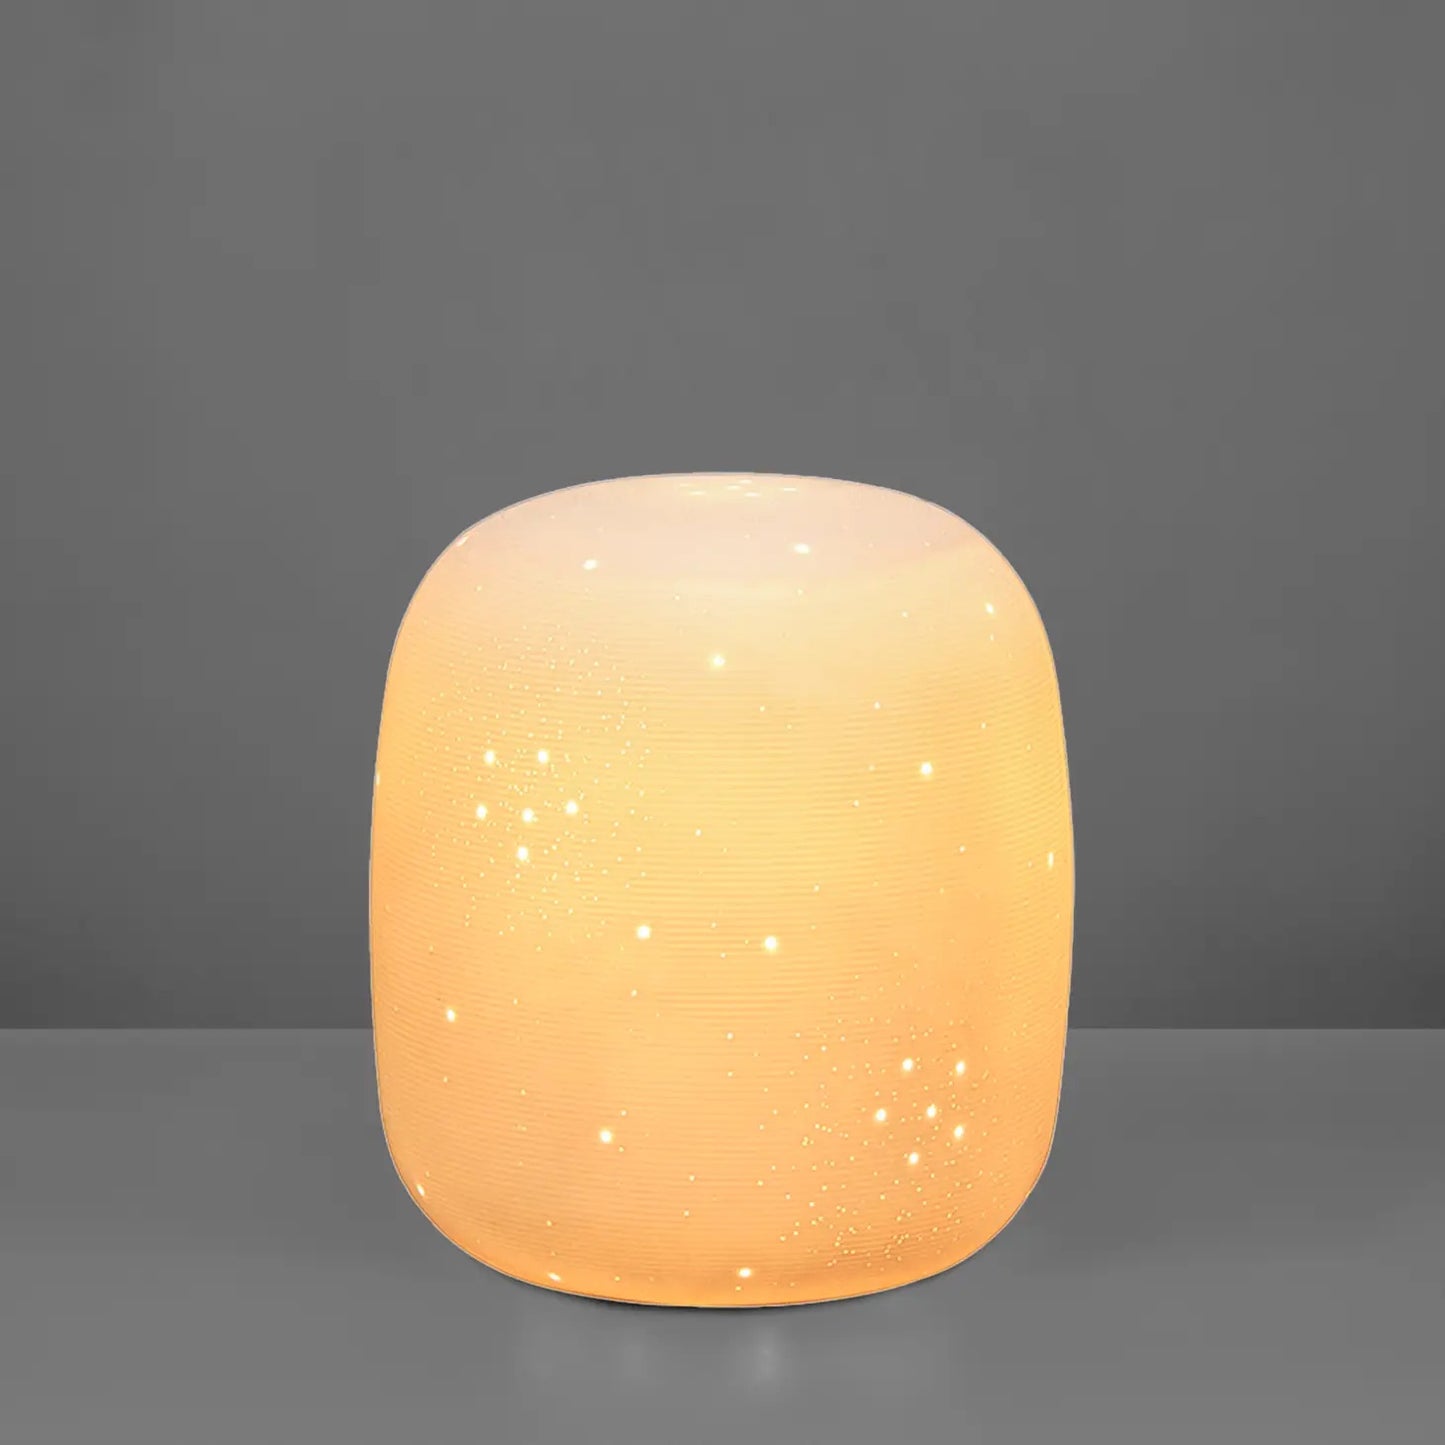 Porcelain Table Lamp in a Starry design - 2 sizes